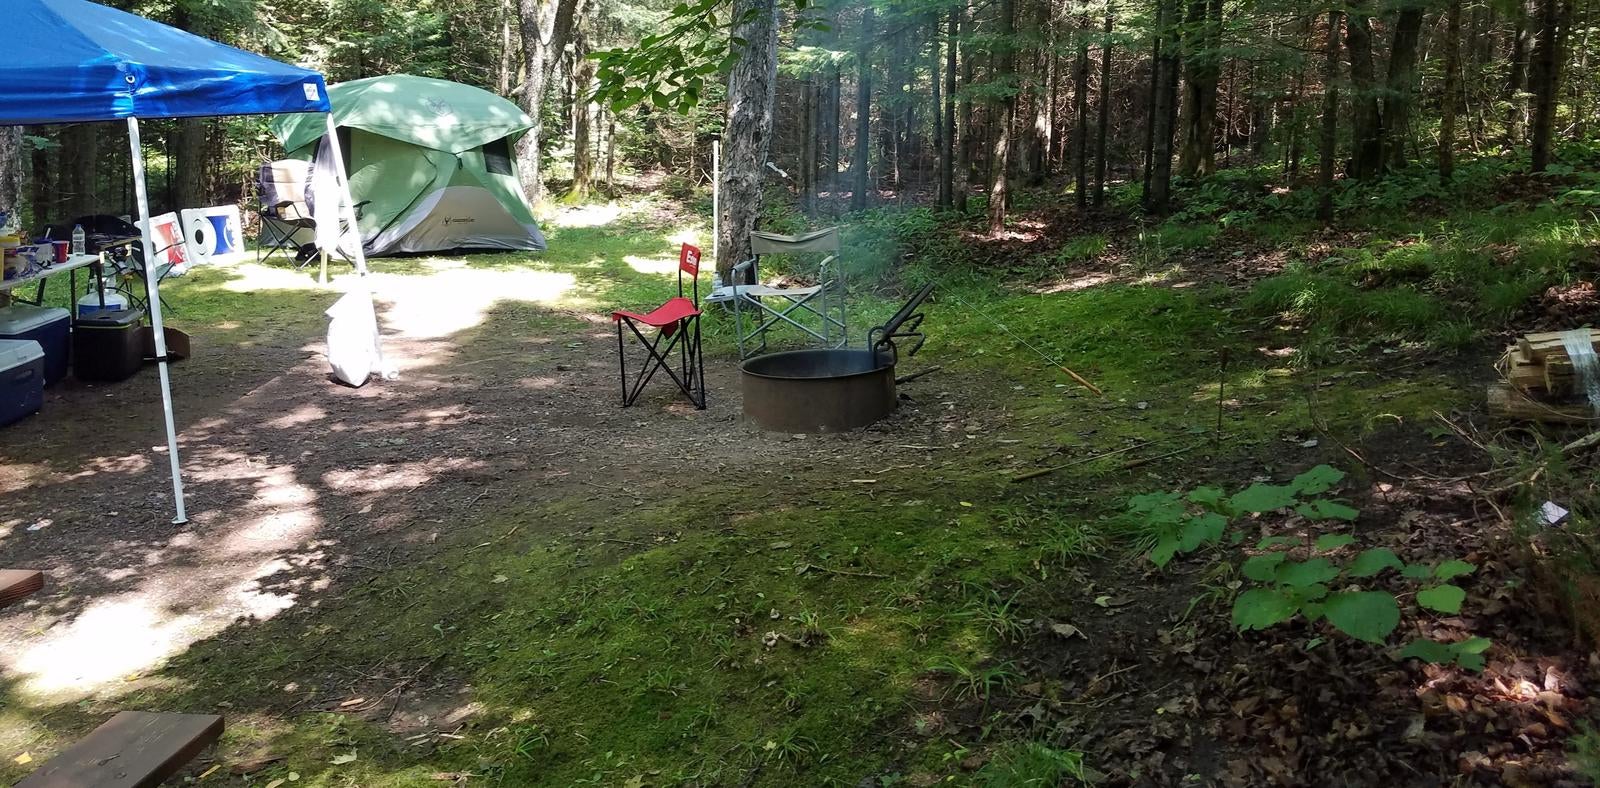 Camper submitted image from Chequamegon National Forest Beaver Lake Campground - 5